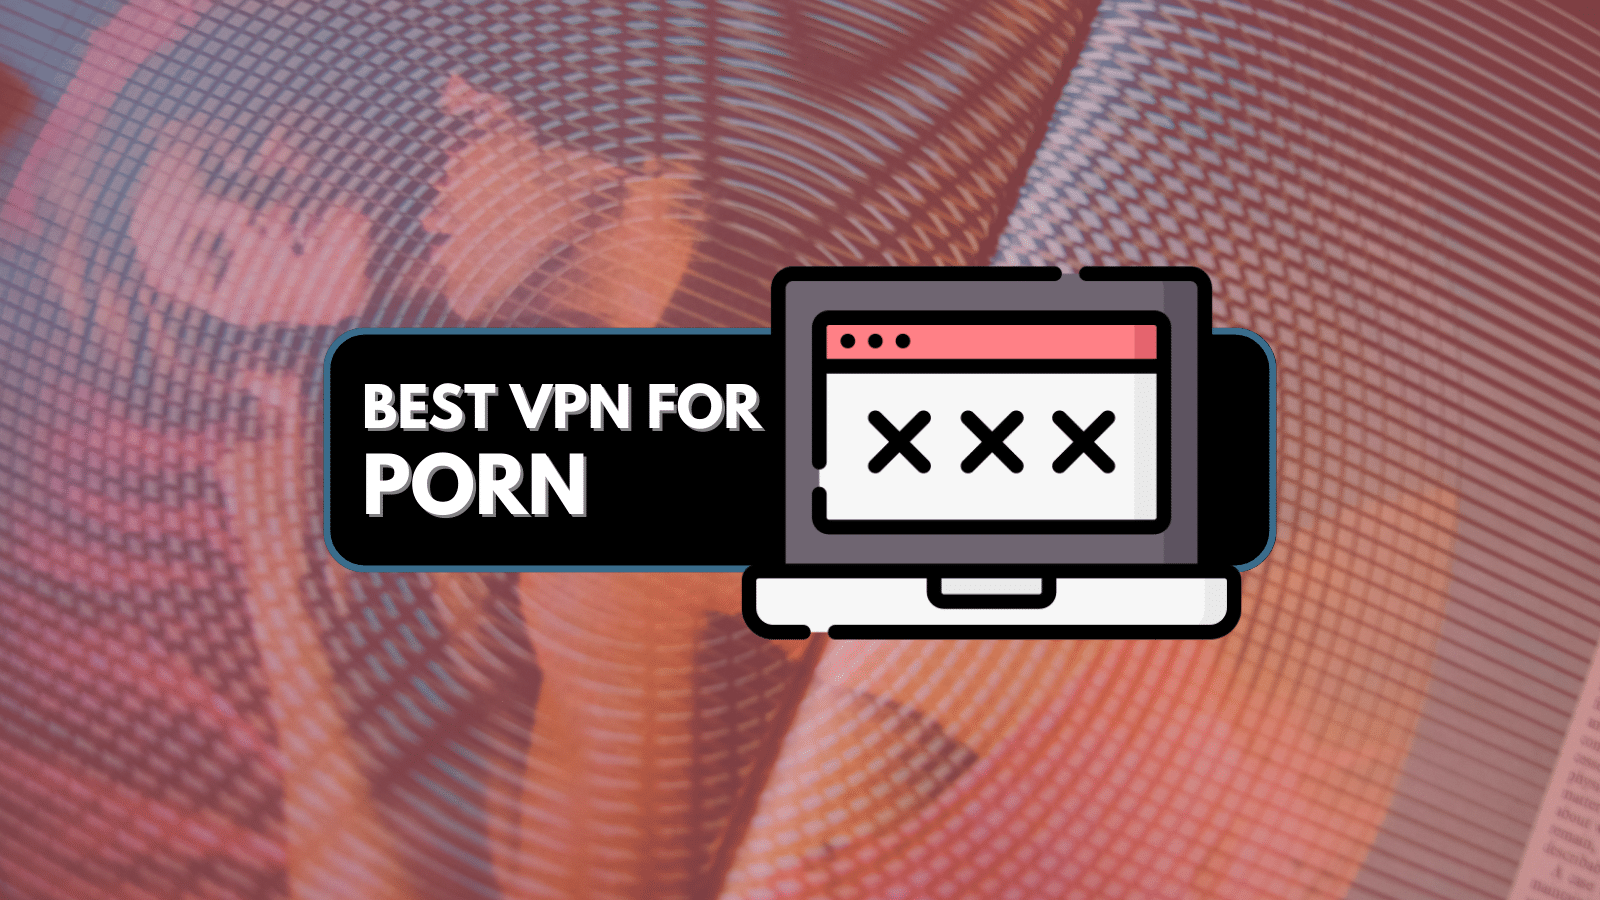 Without Vpn Sex Sides - 9 Best VPNs for Porn in 2023 (Free & Paid) - TechNadu